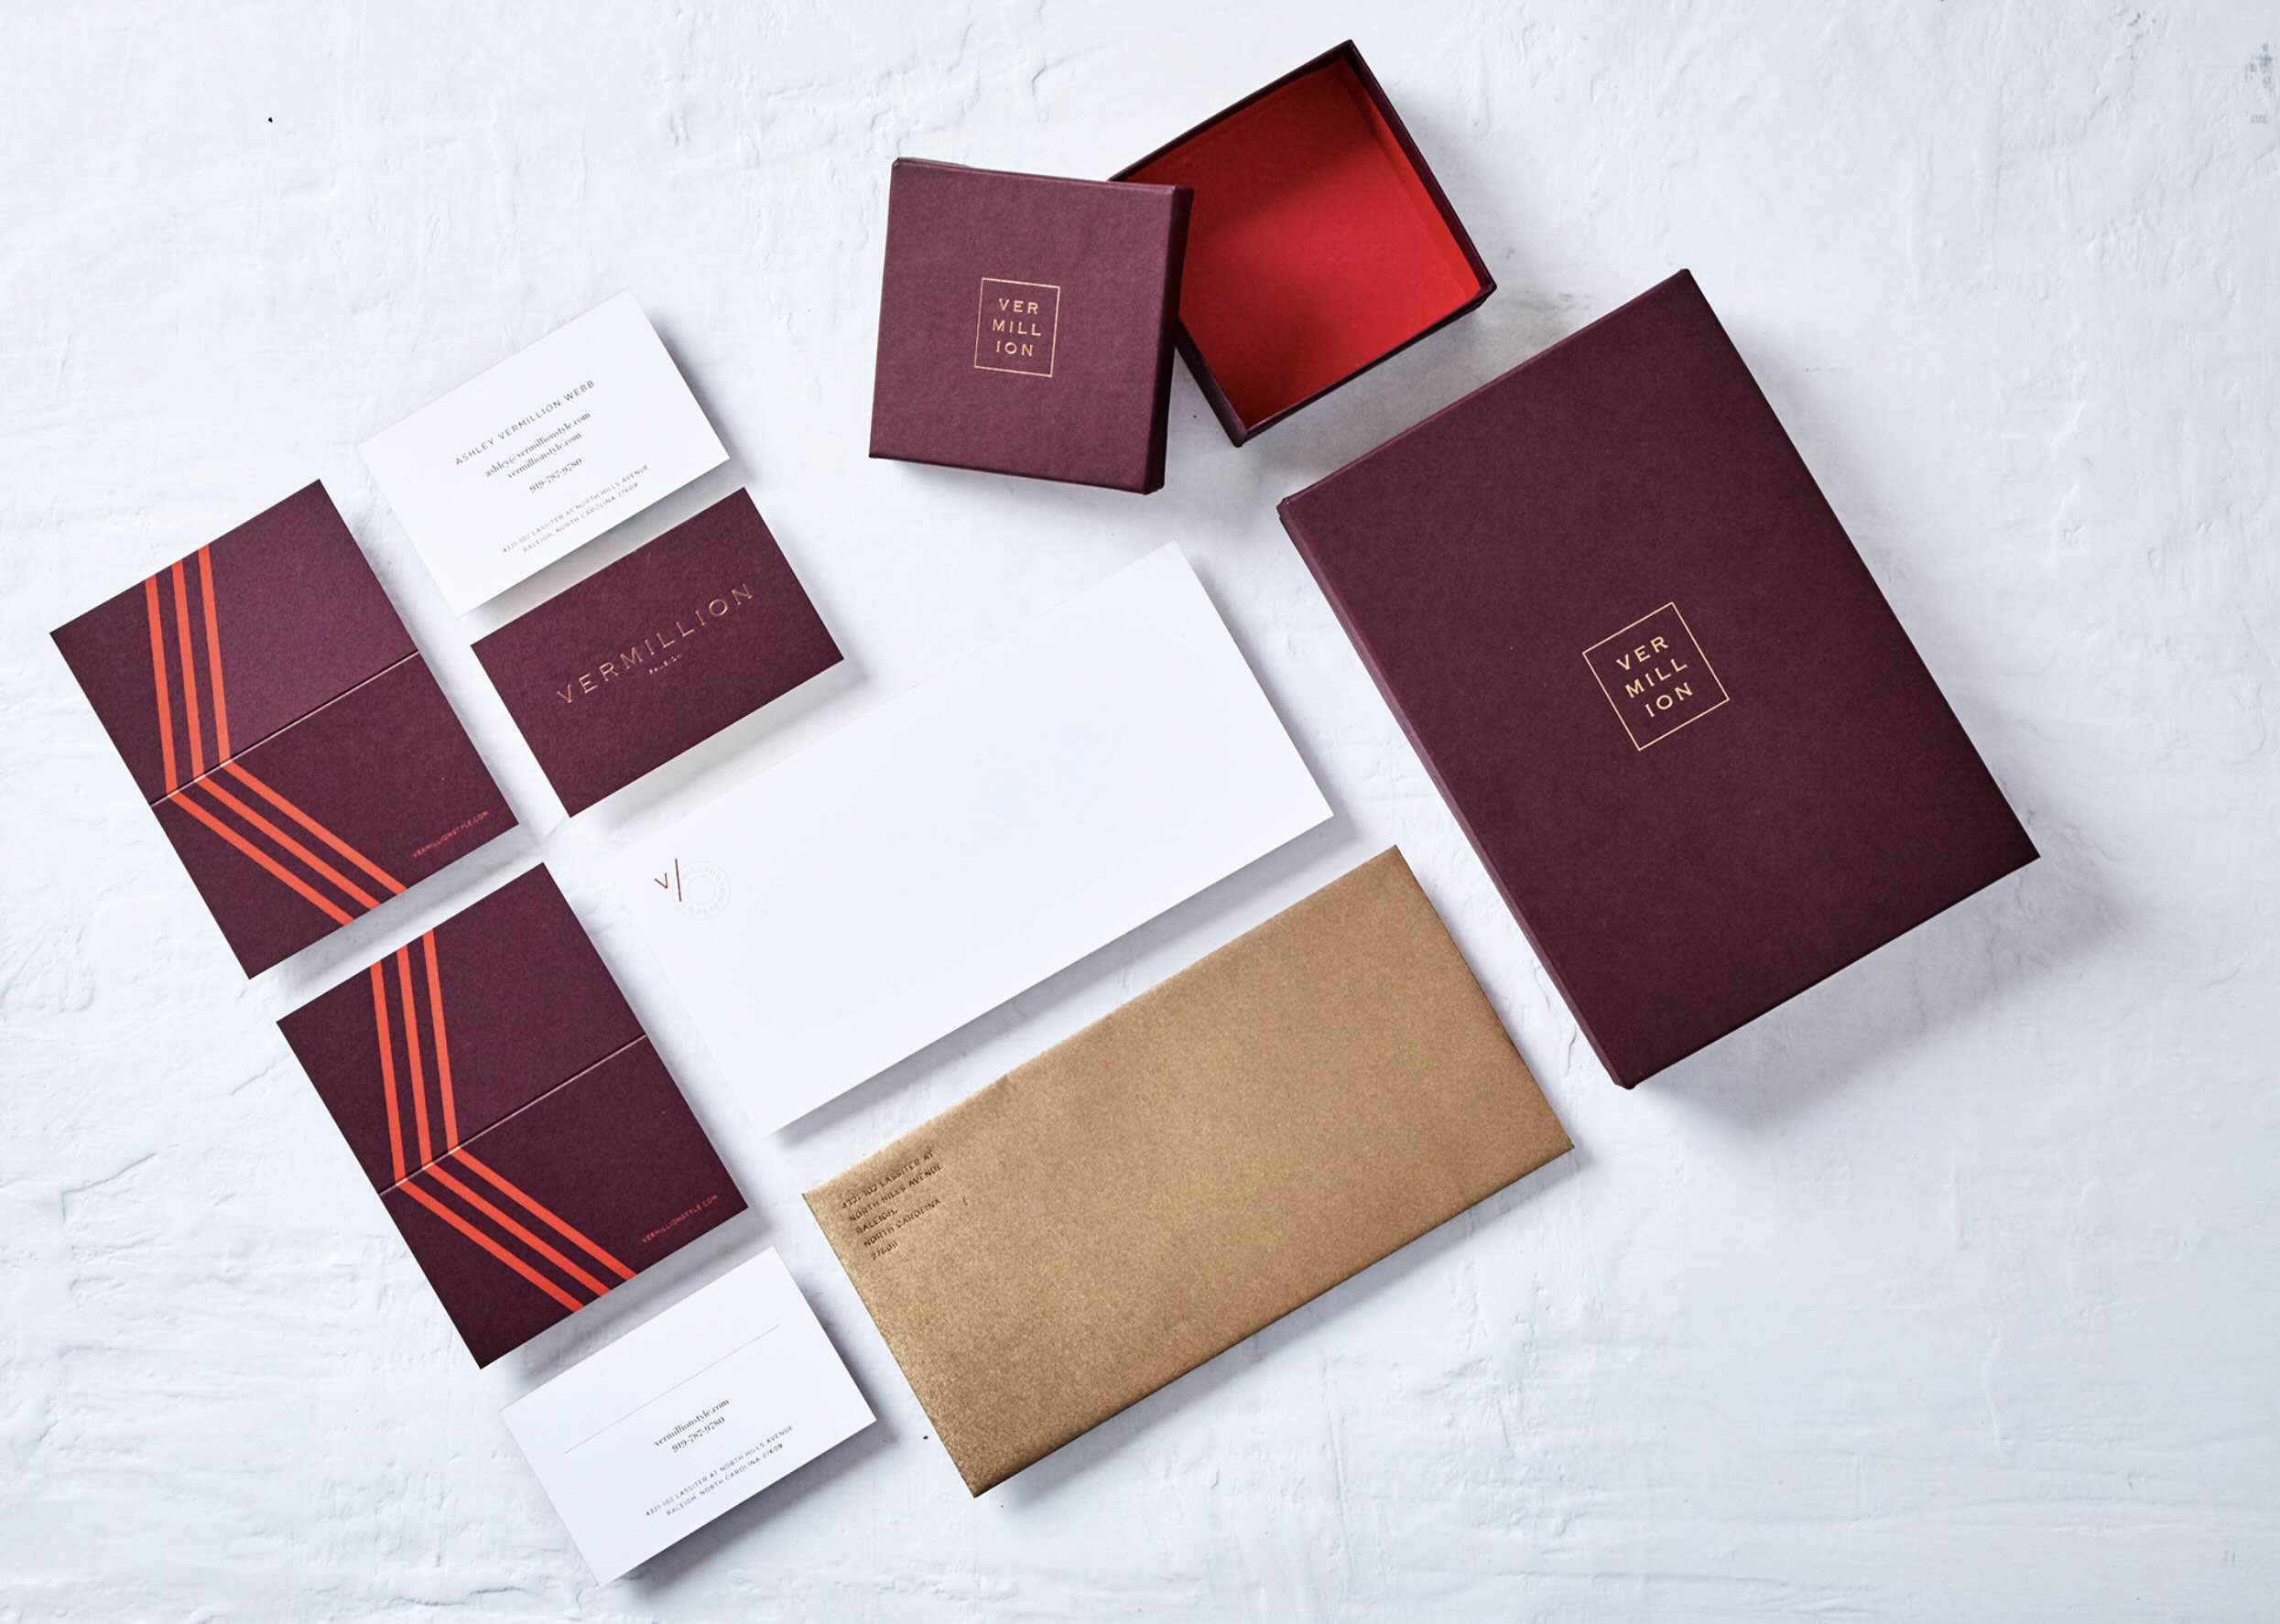 Revamping Your Home: Stitch Design Co’s Stationary For DIY Projects